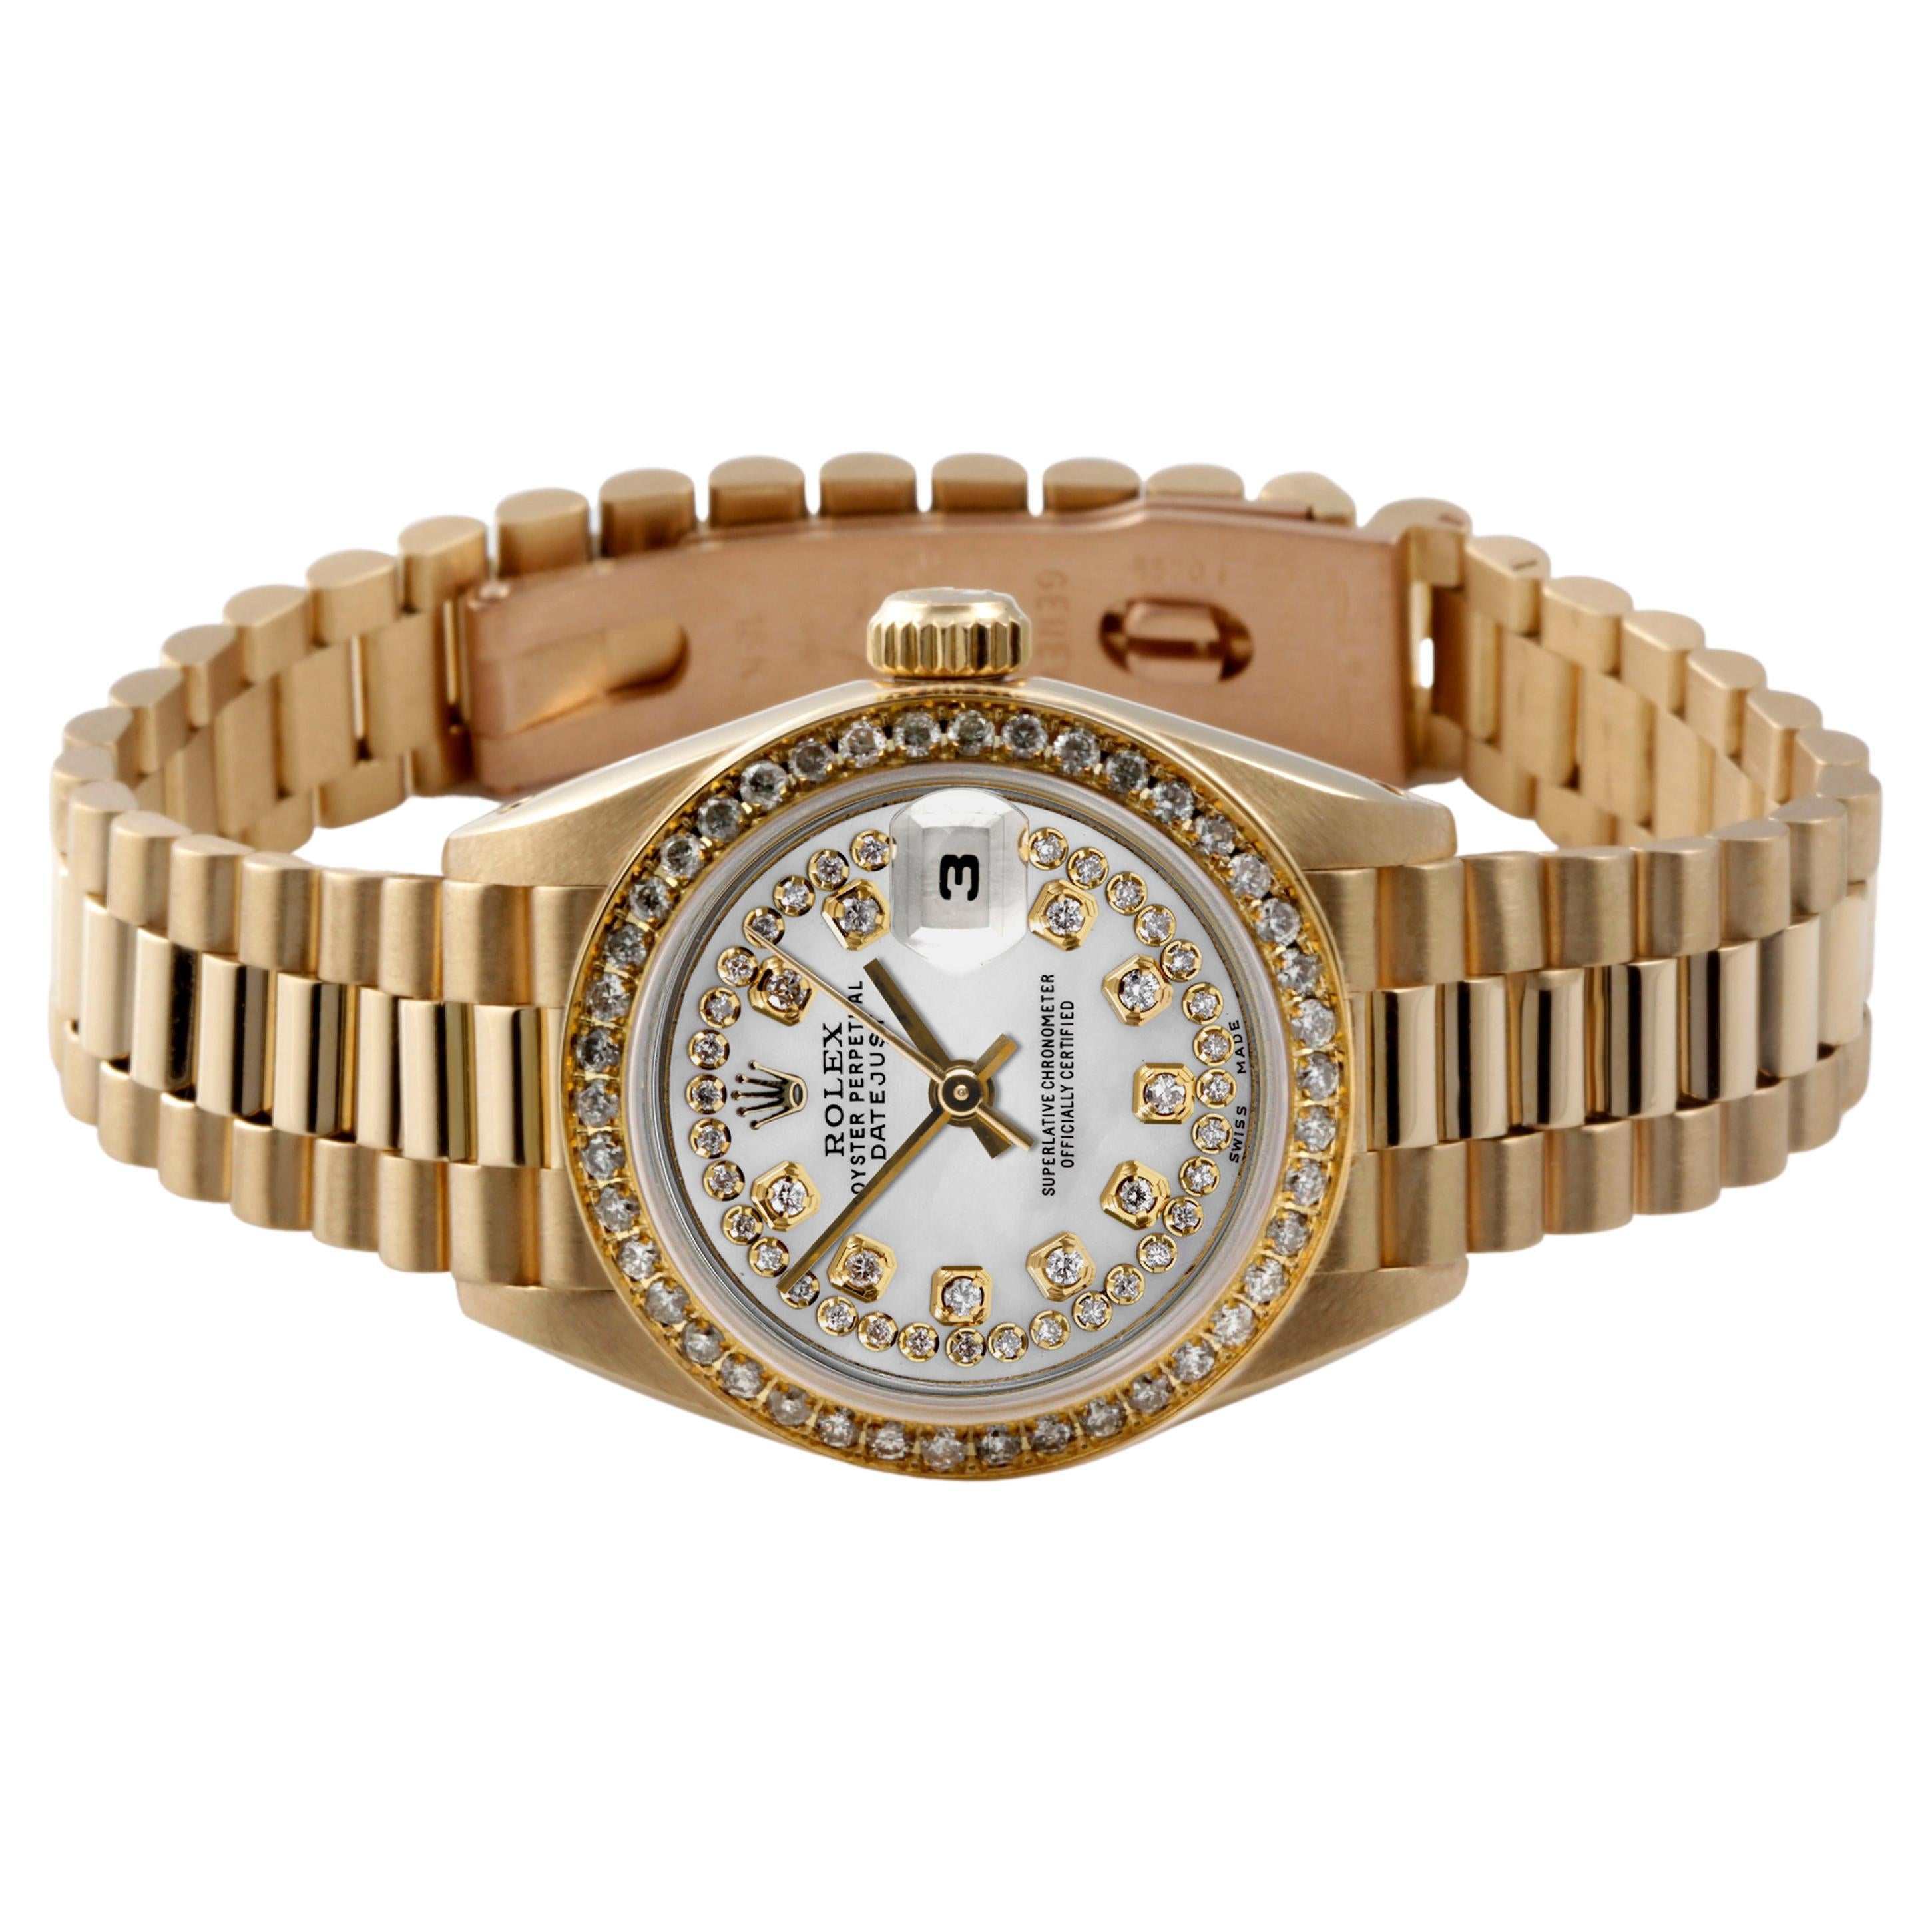 Brand - Rolex
Gender - Ladies
Model - 69178  Datejust/president
Metals - 18k Yellow Gold
Case size - 26mm
Bezel - Yellow Gold Diamond
Crystal - sapphire
Movement - Automatic Cal.2135
Dial - Refinished String Diamond
Wrist band - Yellow gold